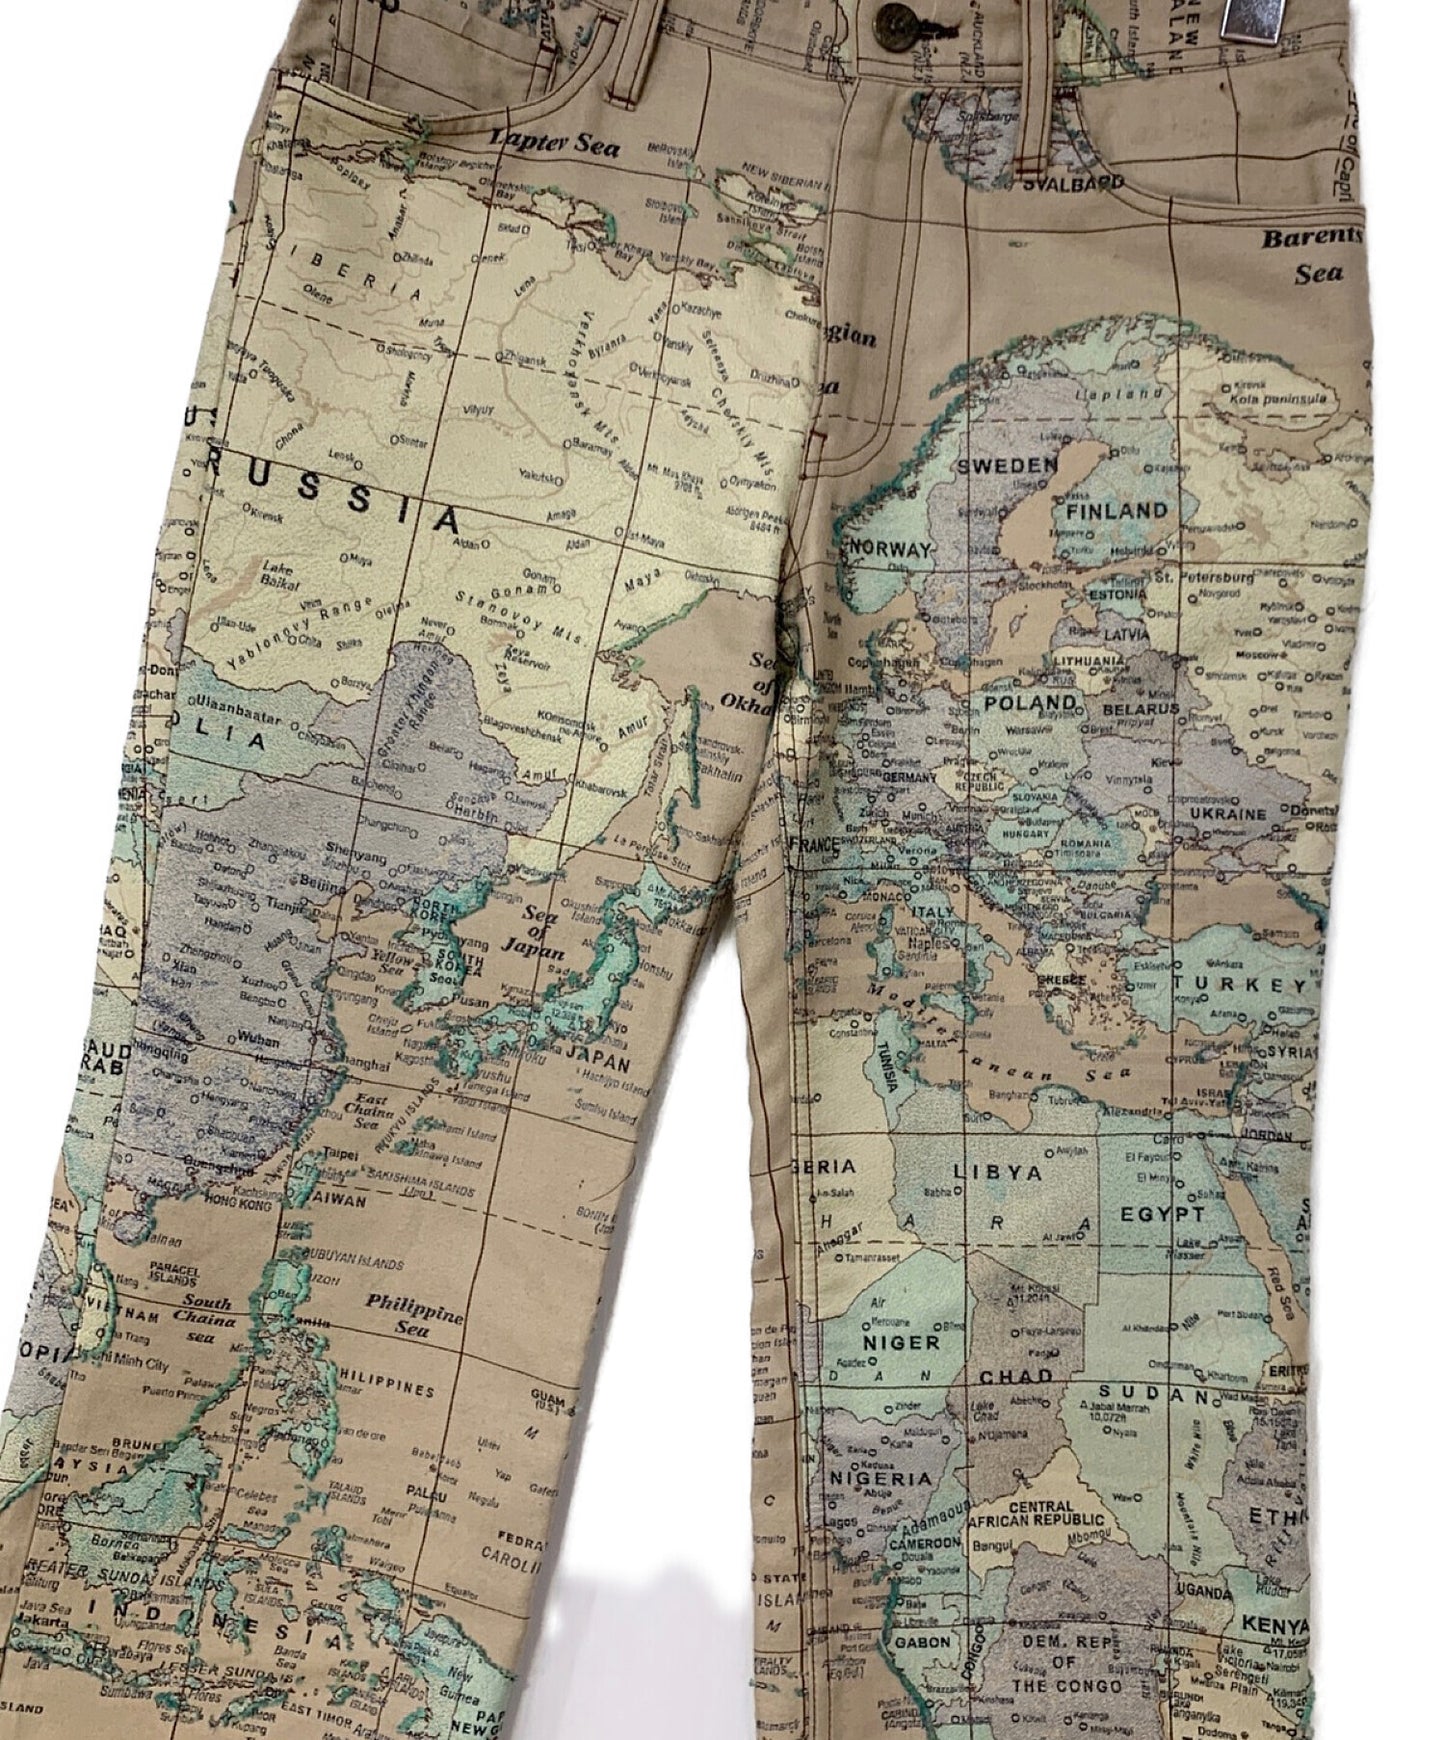 [Pre-owned] PLEATS PLEASE World Map-Print Pants PP82-ZF852